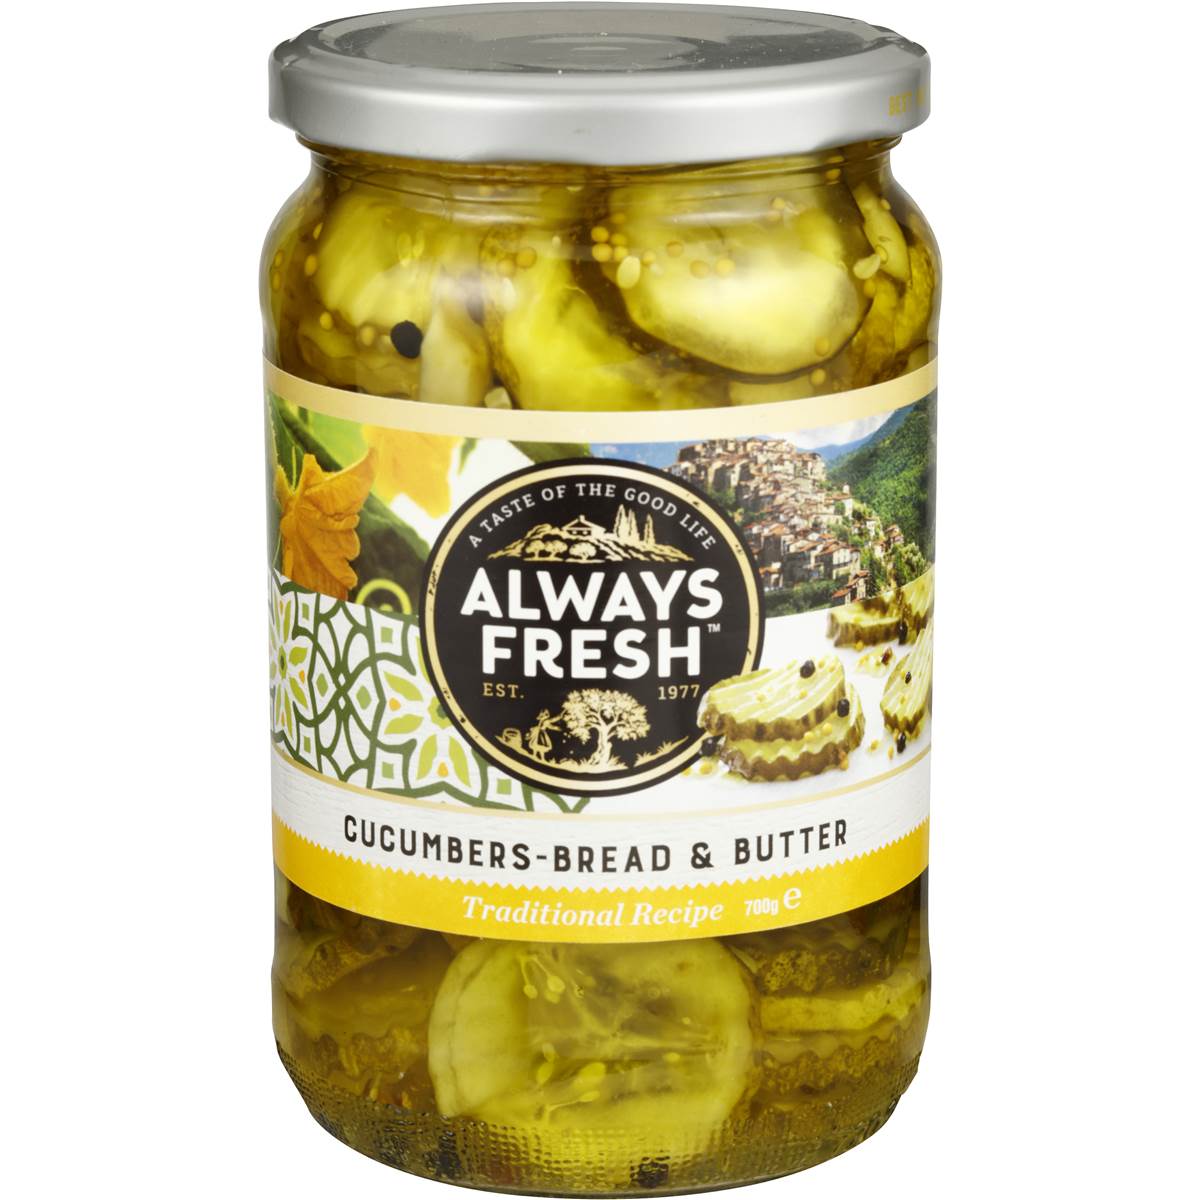 Always Fresh Traditional Recipe Bread & Butter Cucumbers 700g